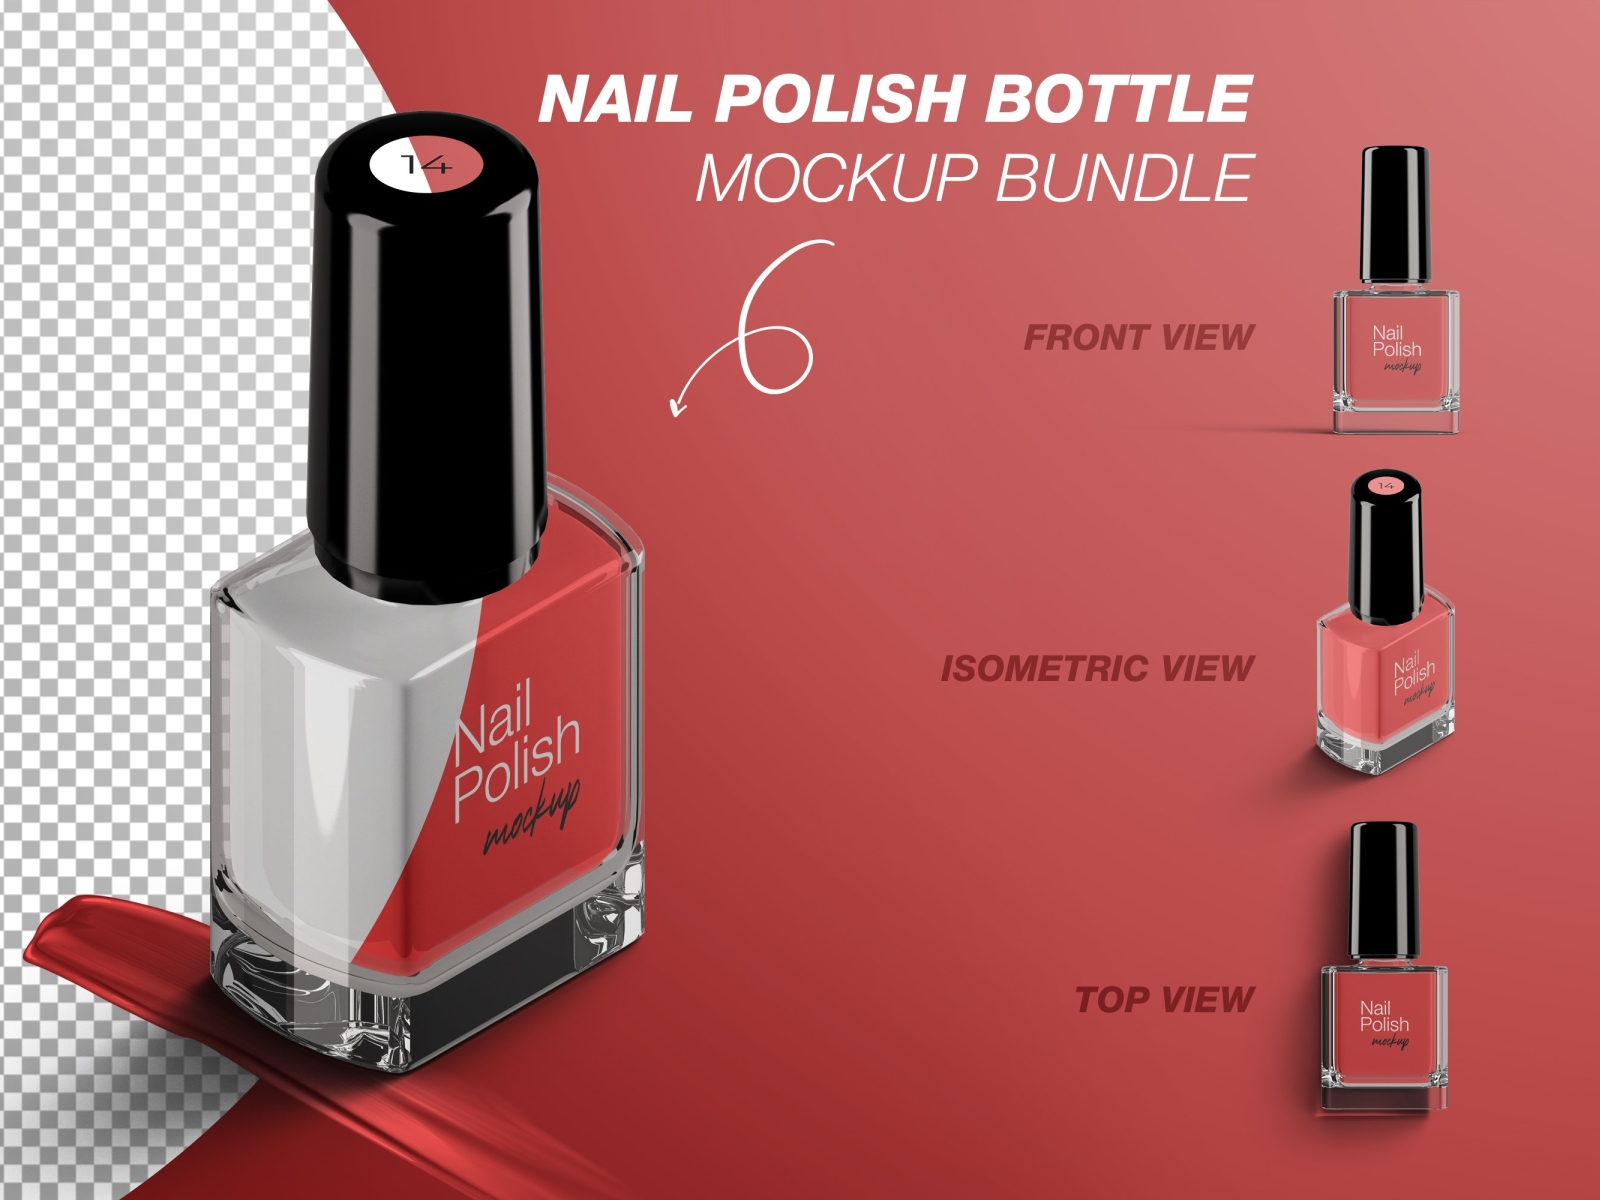 1. OPI Nail Lacquer Bottle Design - wide 4